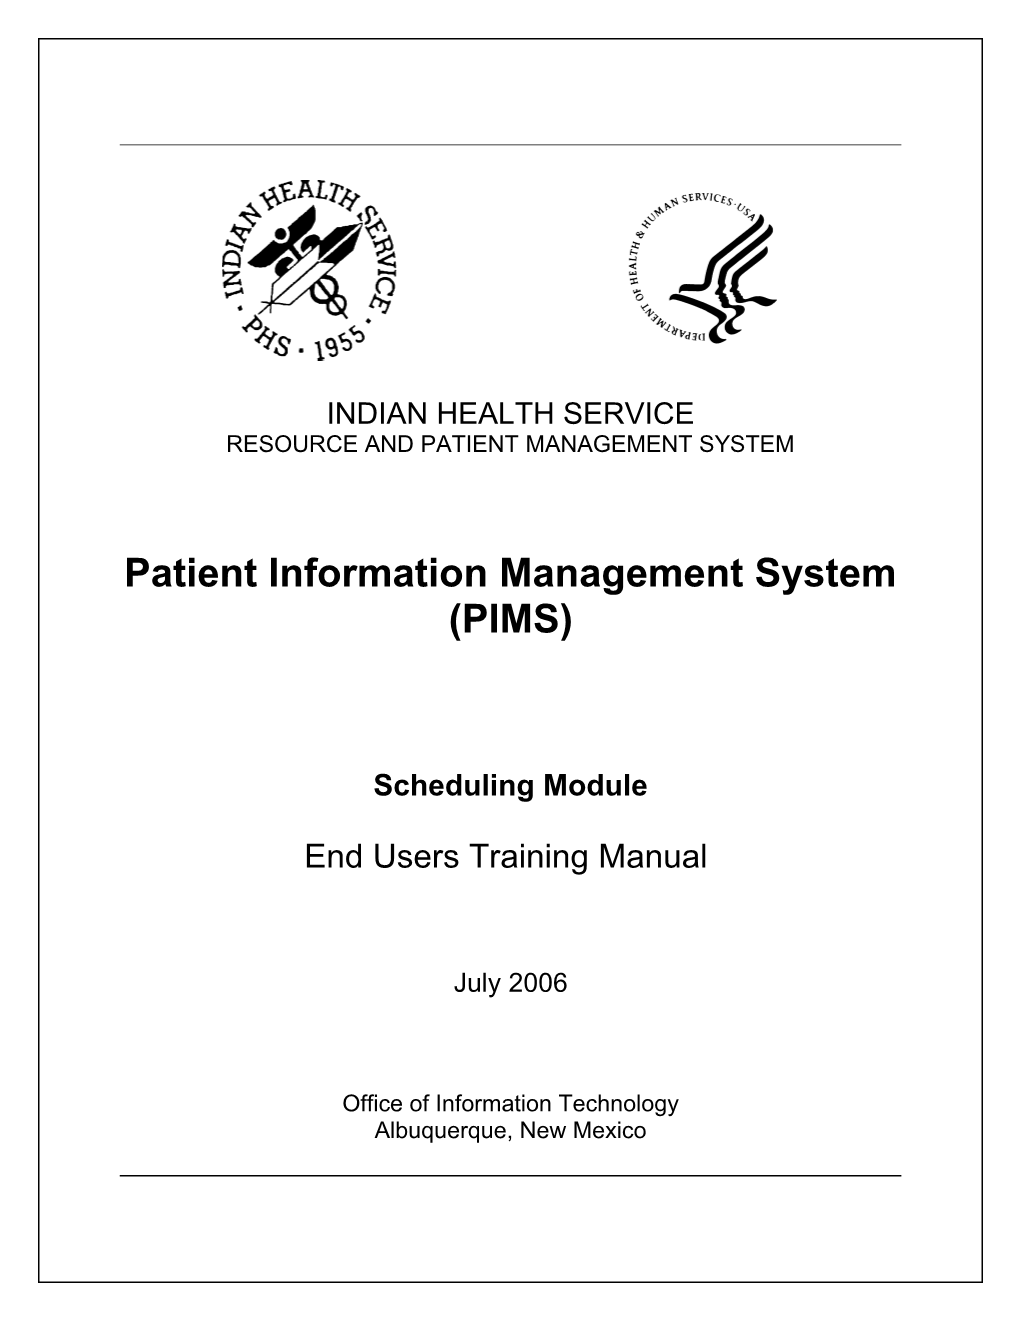 PIMS Scheduling Module End Users Training Manual